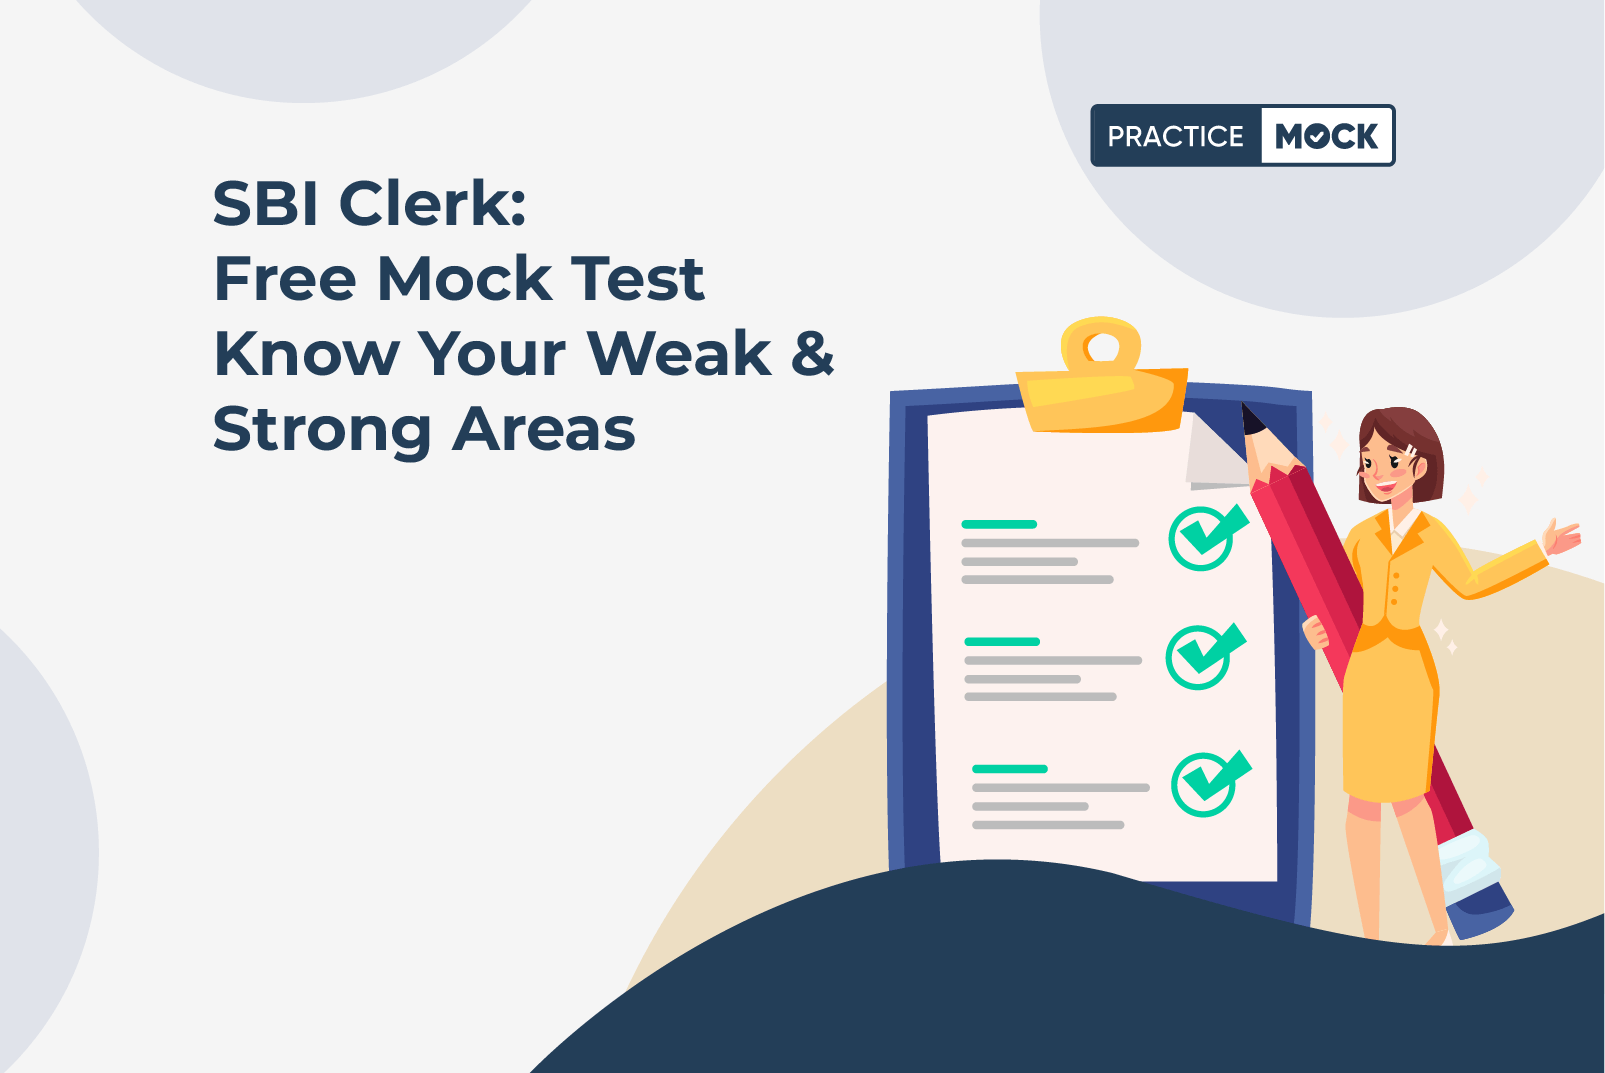 SBI Clerk Free Mock Test Know Your Weak & Strong Area